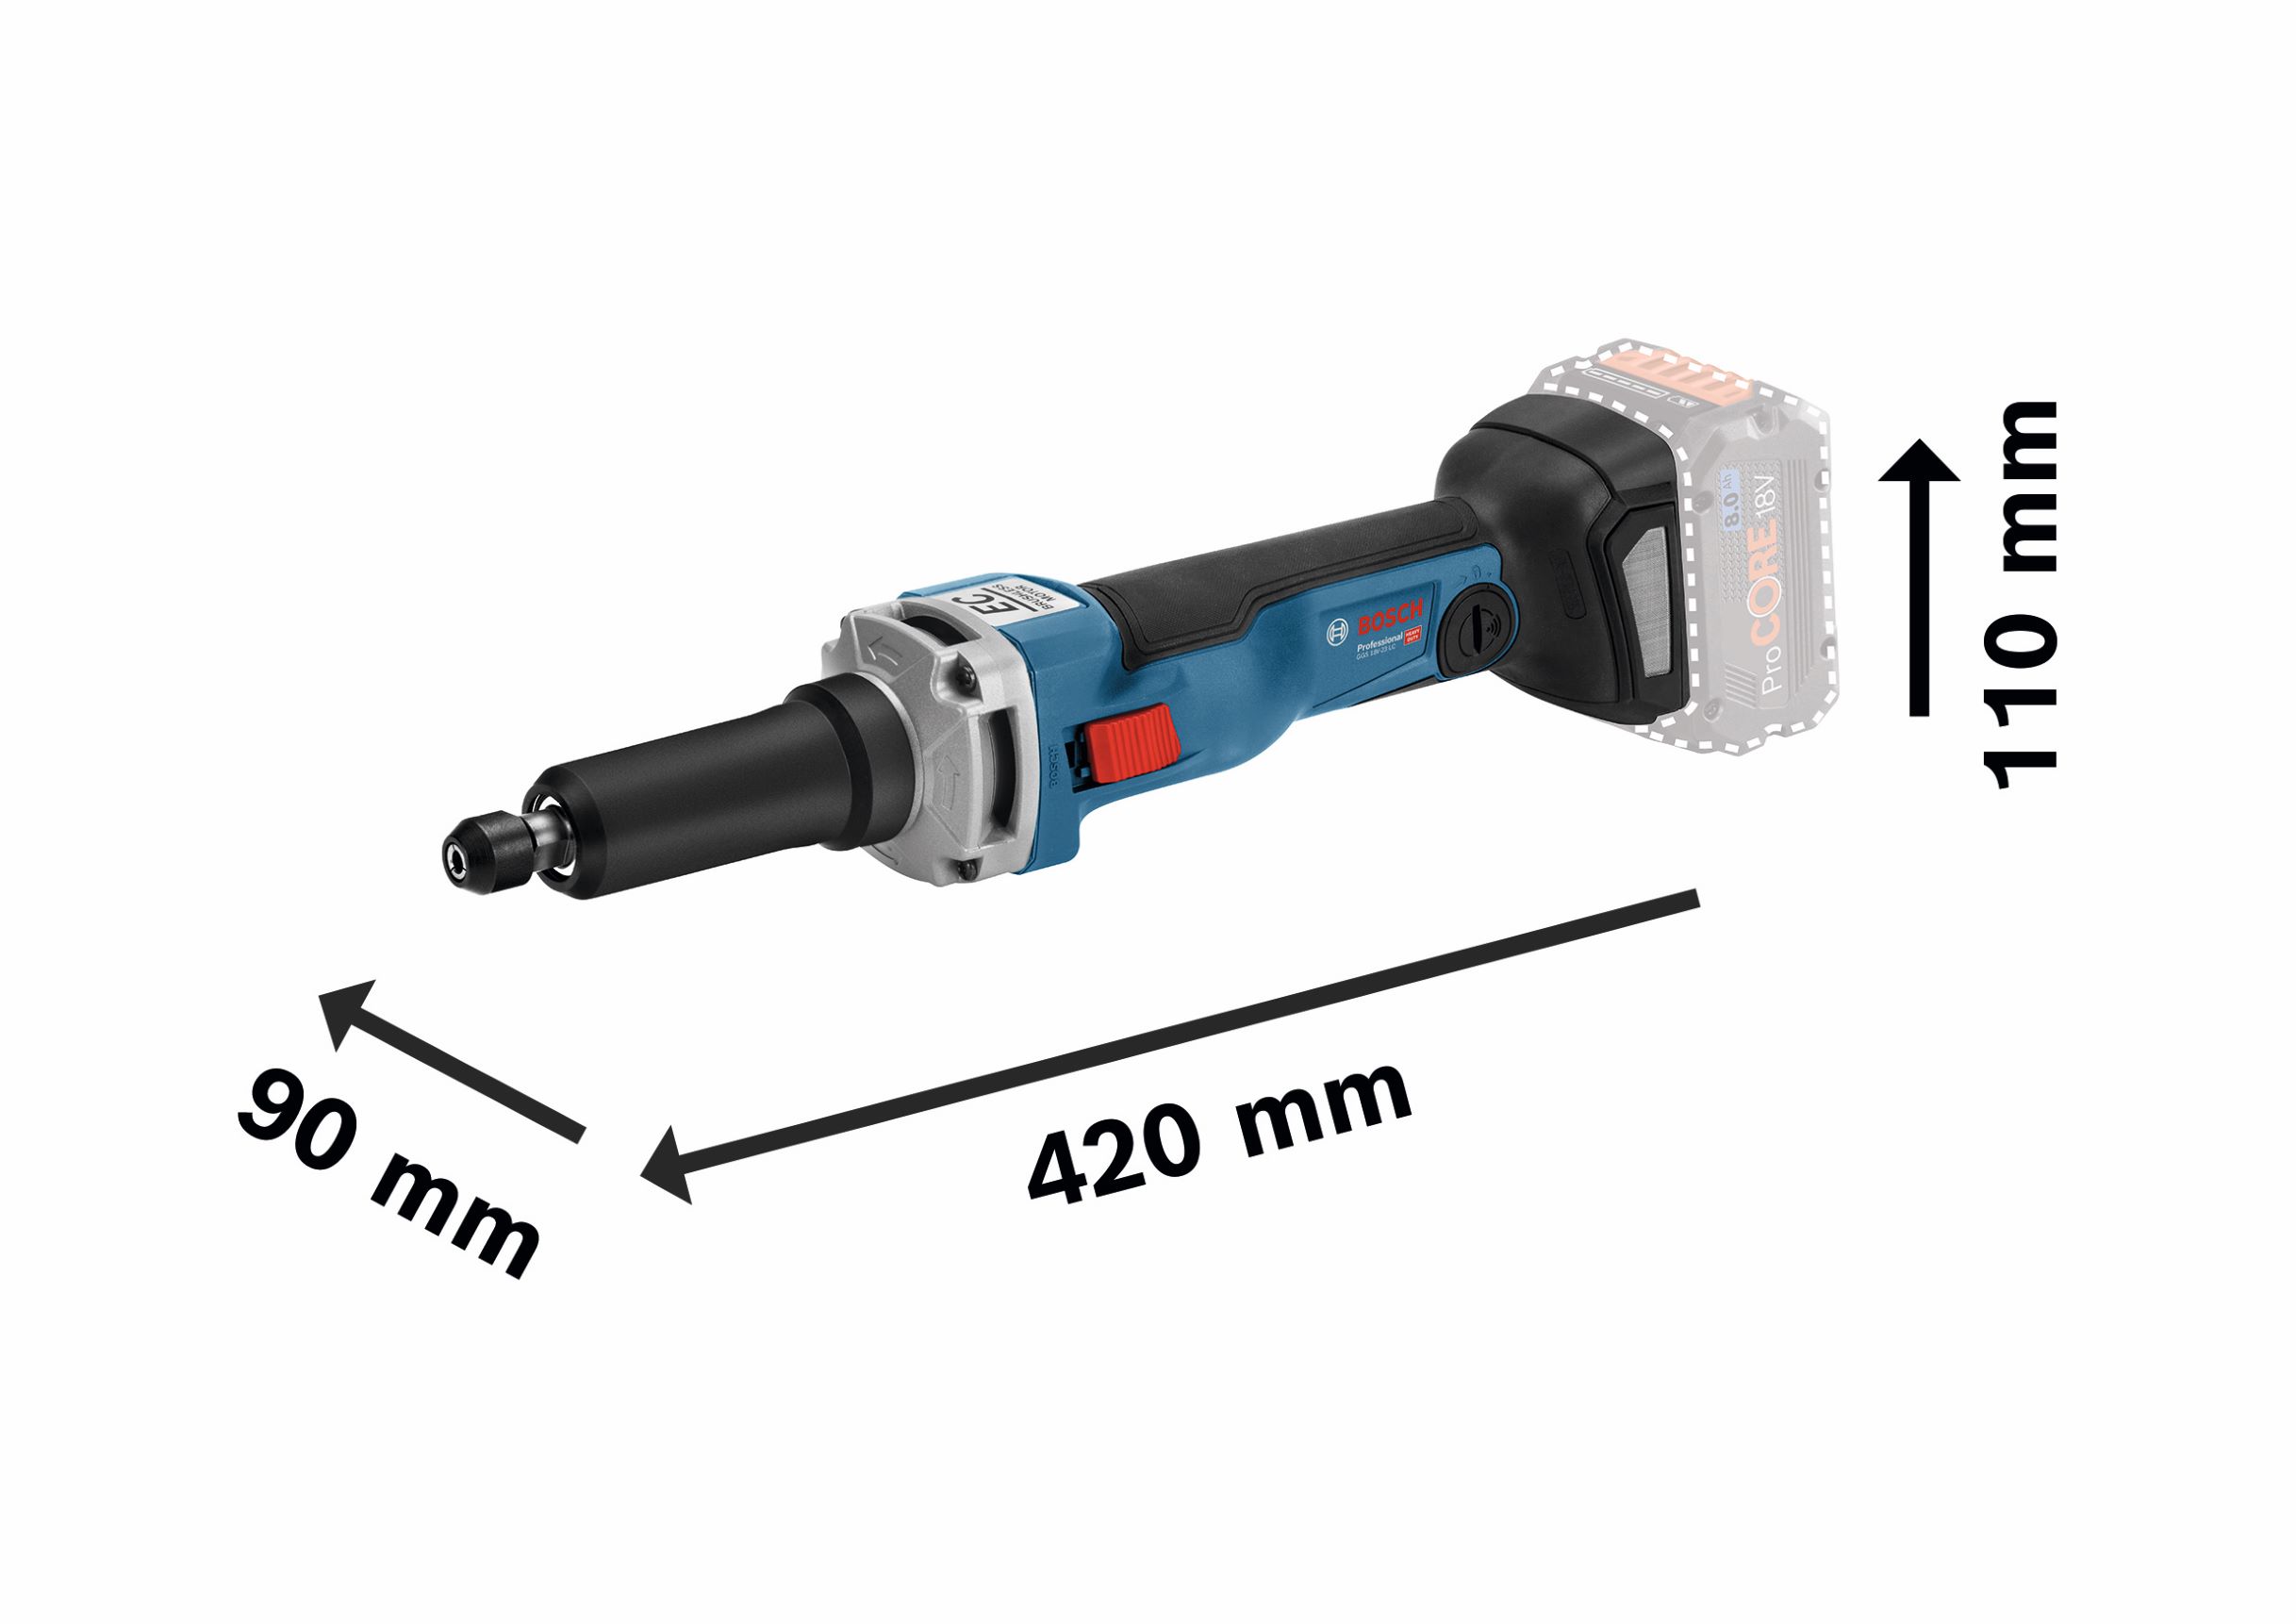 GGS 18V-23 LC Cordless Straight Grinder in L-Boxx Bosch - 3